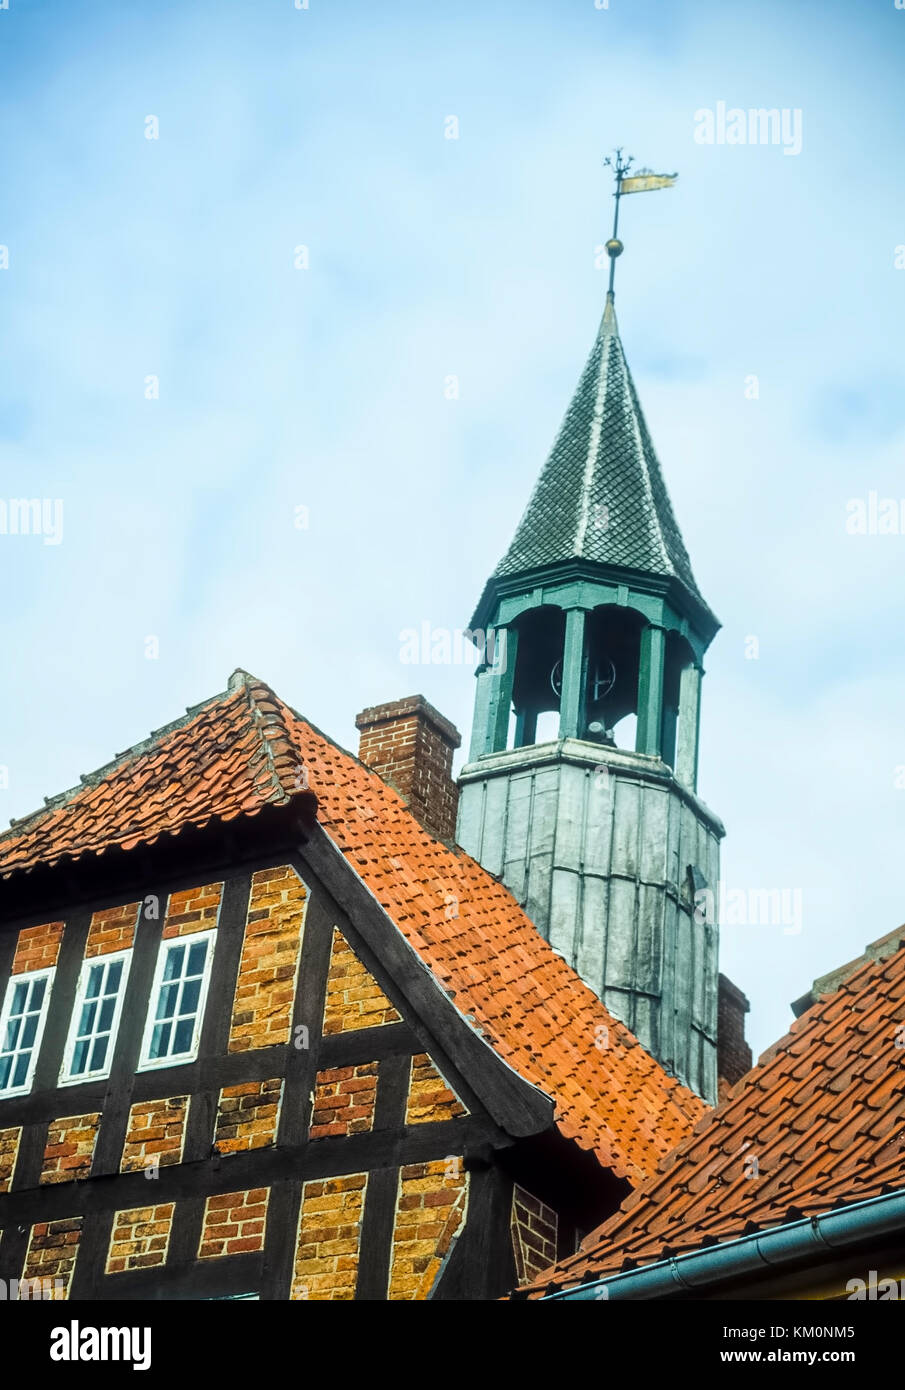 Rooftop view in the picturesque town of Ebletoft in Denmark Stock Photo